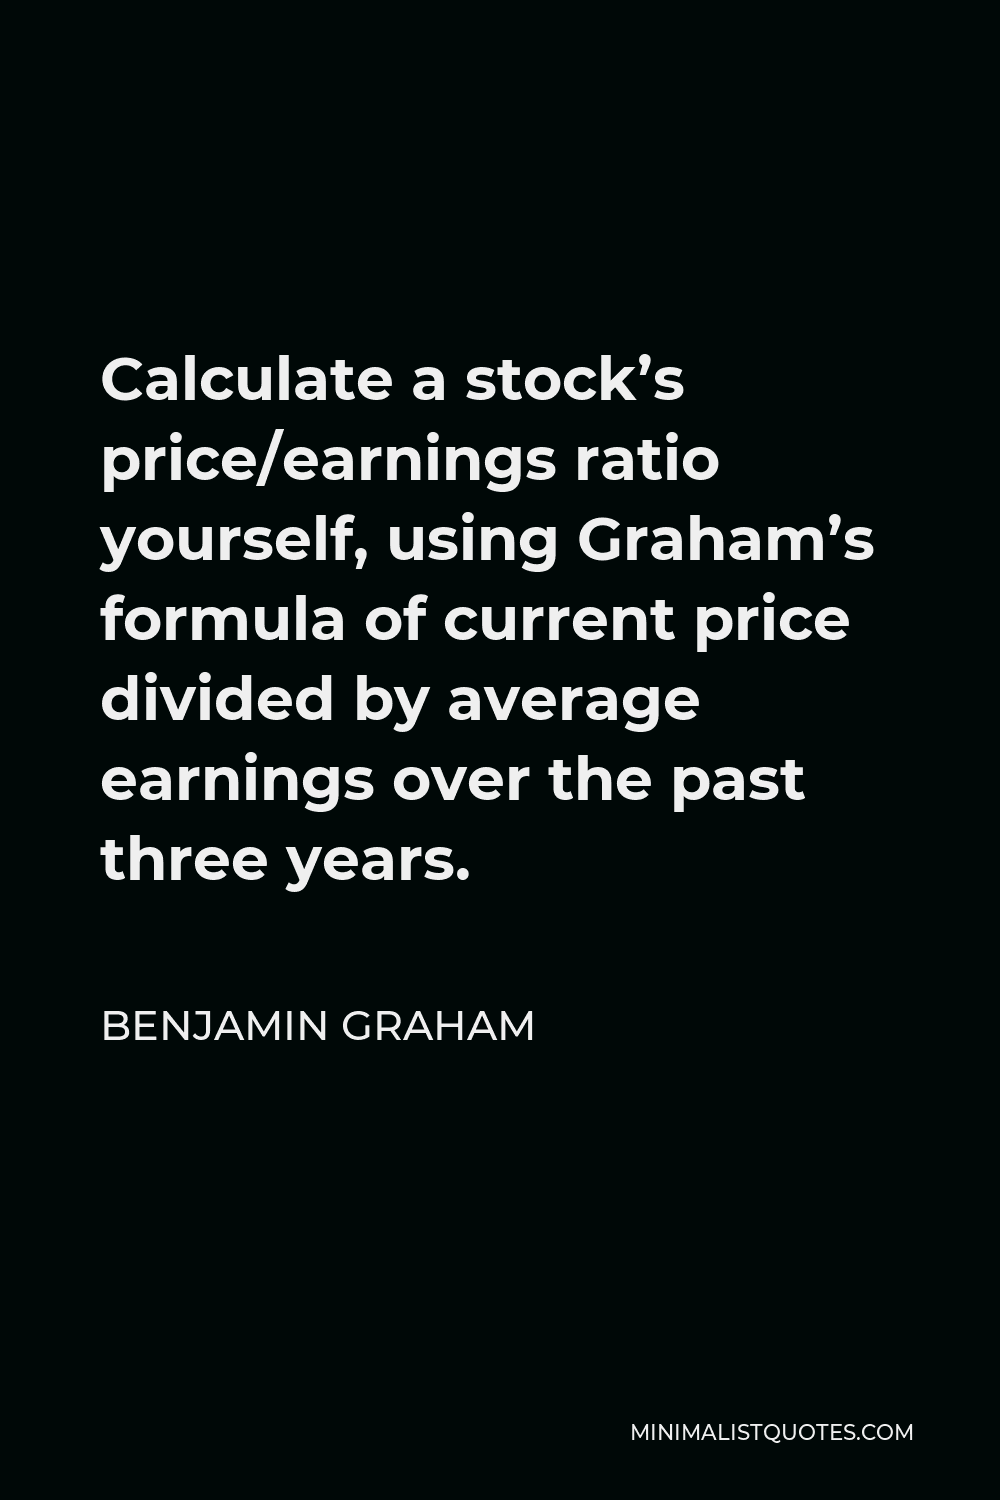 Benjamin Graham Quote - Calculate a stock’s price/earnings ratio yourself, using Graham’s formula of current price divided by average earnings over the past three years.